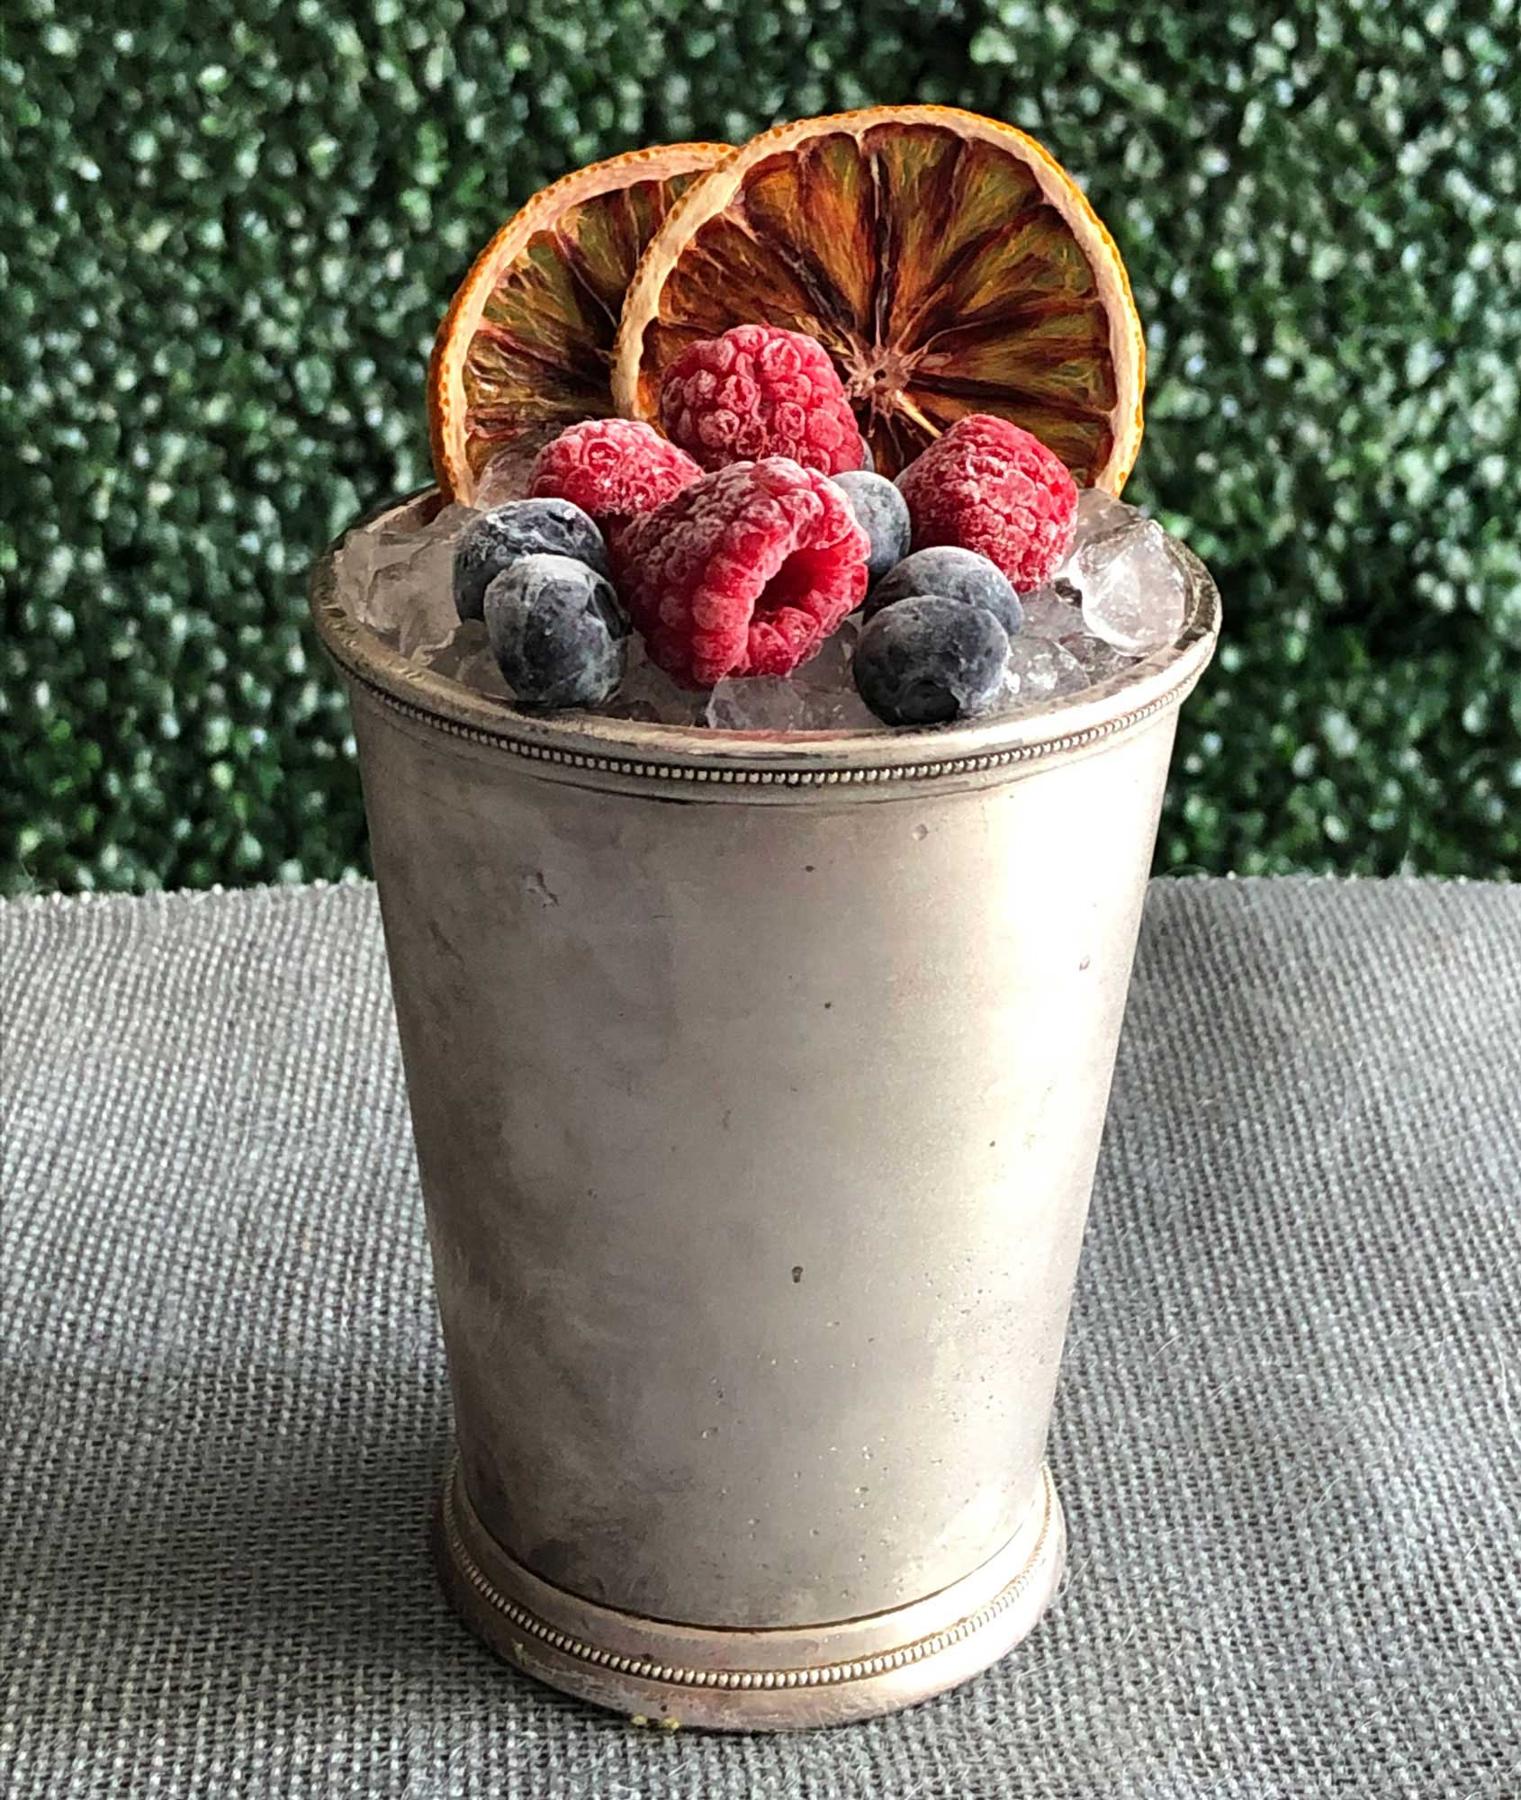 An example of the Bonal Cobbler, the mixed drink (drink), by Kirk Estopinal, Bellocq, New Orleans, featuring Bonal Gentiane-Quina, orange wheel, sugar, grapefruit twists, and berry; photo by Lee Edwards